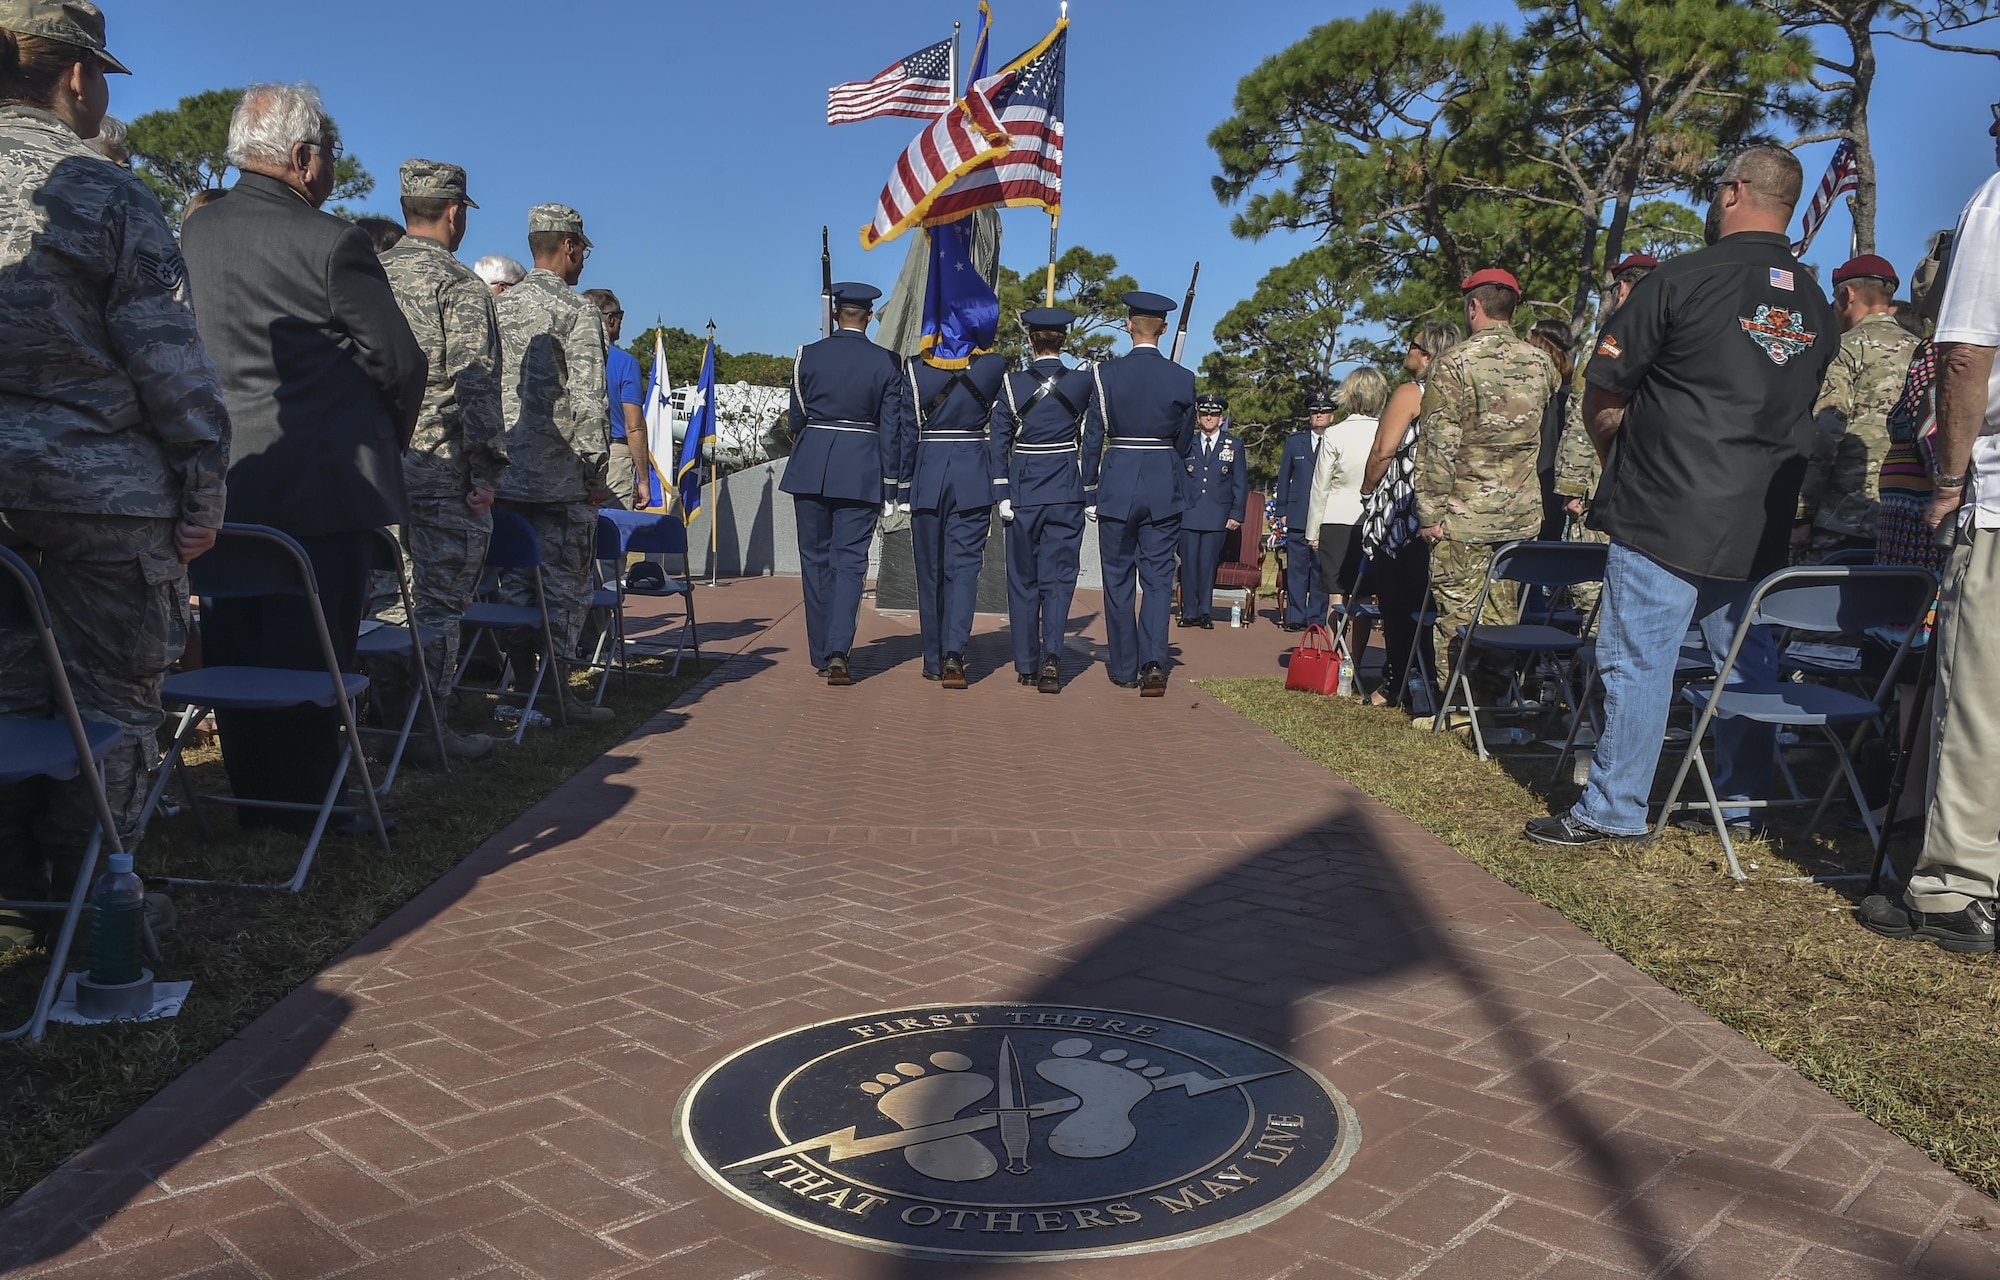 The Hurlburt Field Honor Guard posts the colors during the Special Tactics Memorial dedication ceremony at Hurlburt Field, Fla., Oct. 20, 2016. The memorial was conceptualized by Steve Haggett, a 30-year retired chief master sergeant, who served 14 years in Air Force Special Operations Command as a first sergeant and maintenance crew chief. Haggett volunteered to lead the project, from concept to design to final creation. (U.S. Air Force photo by Senior Airman Ryan Conroy) 